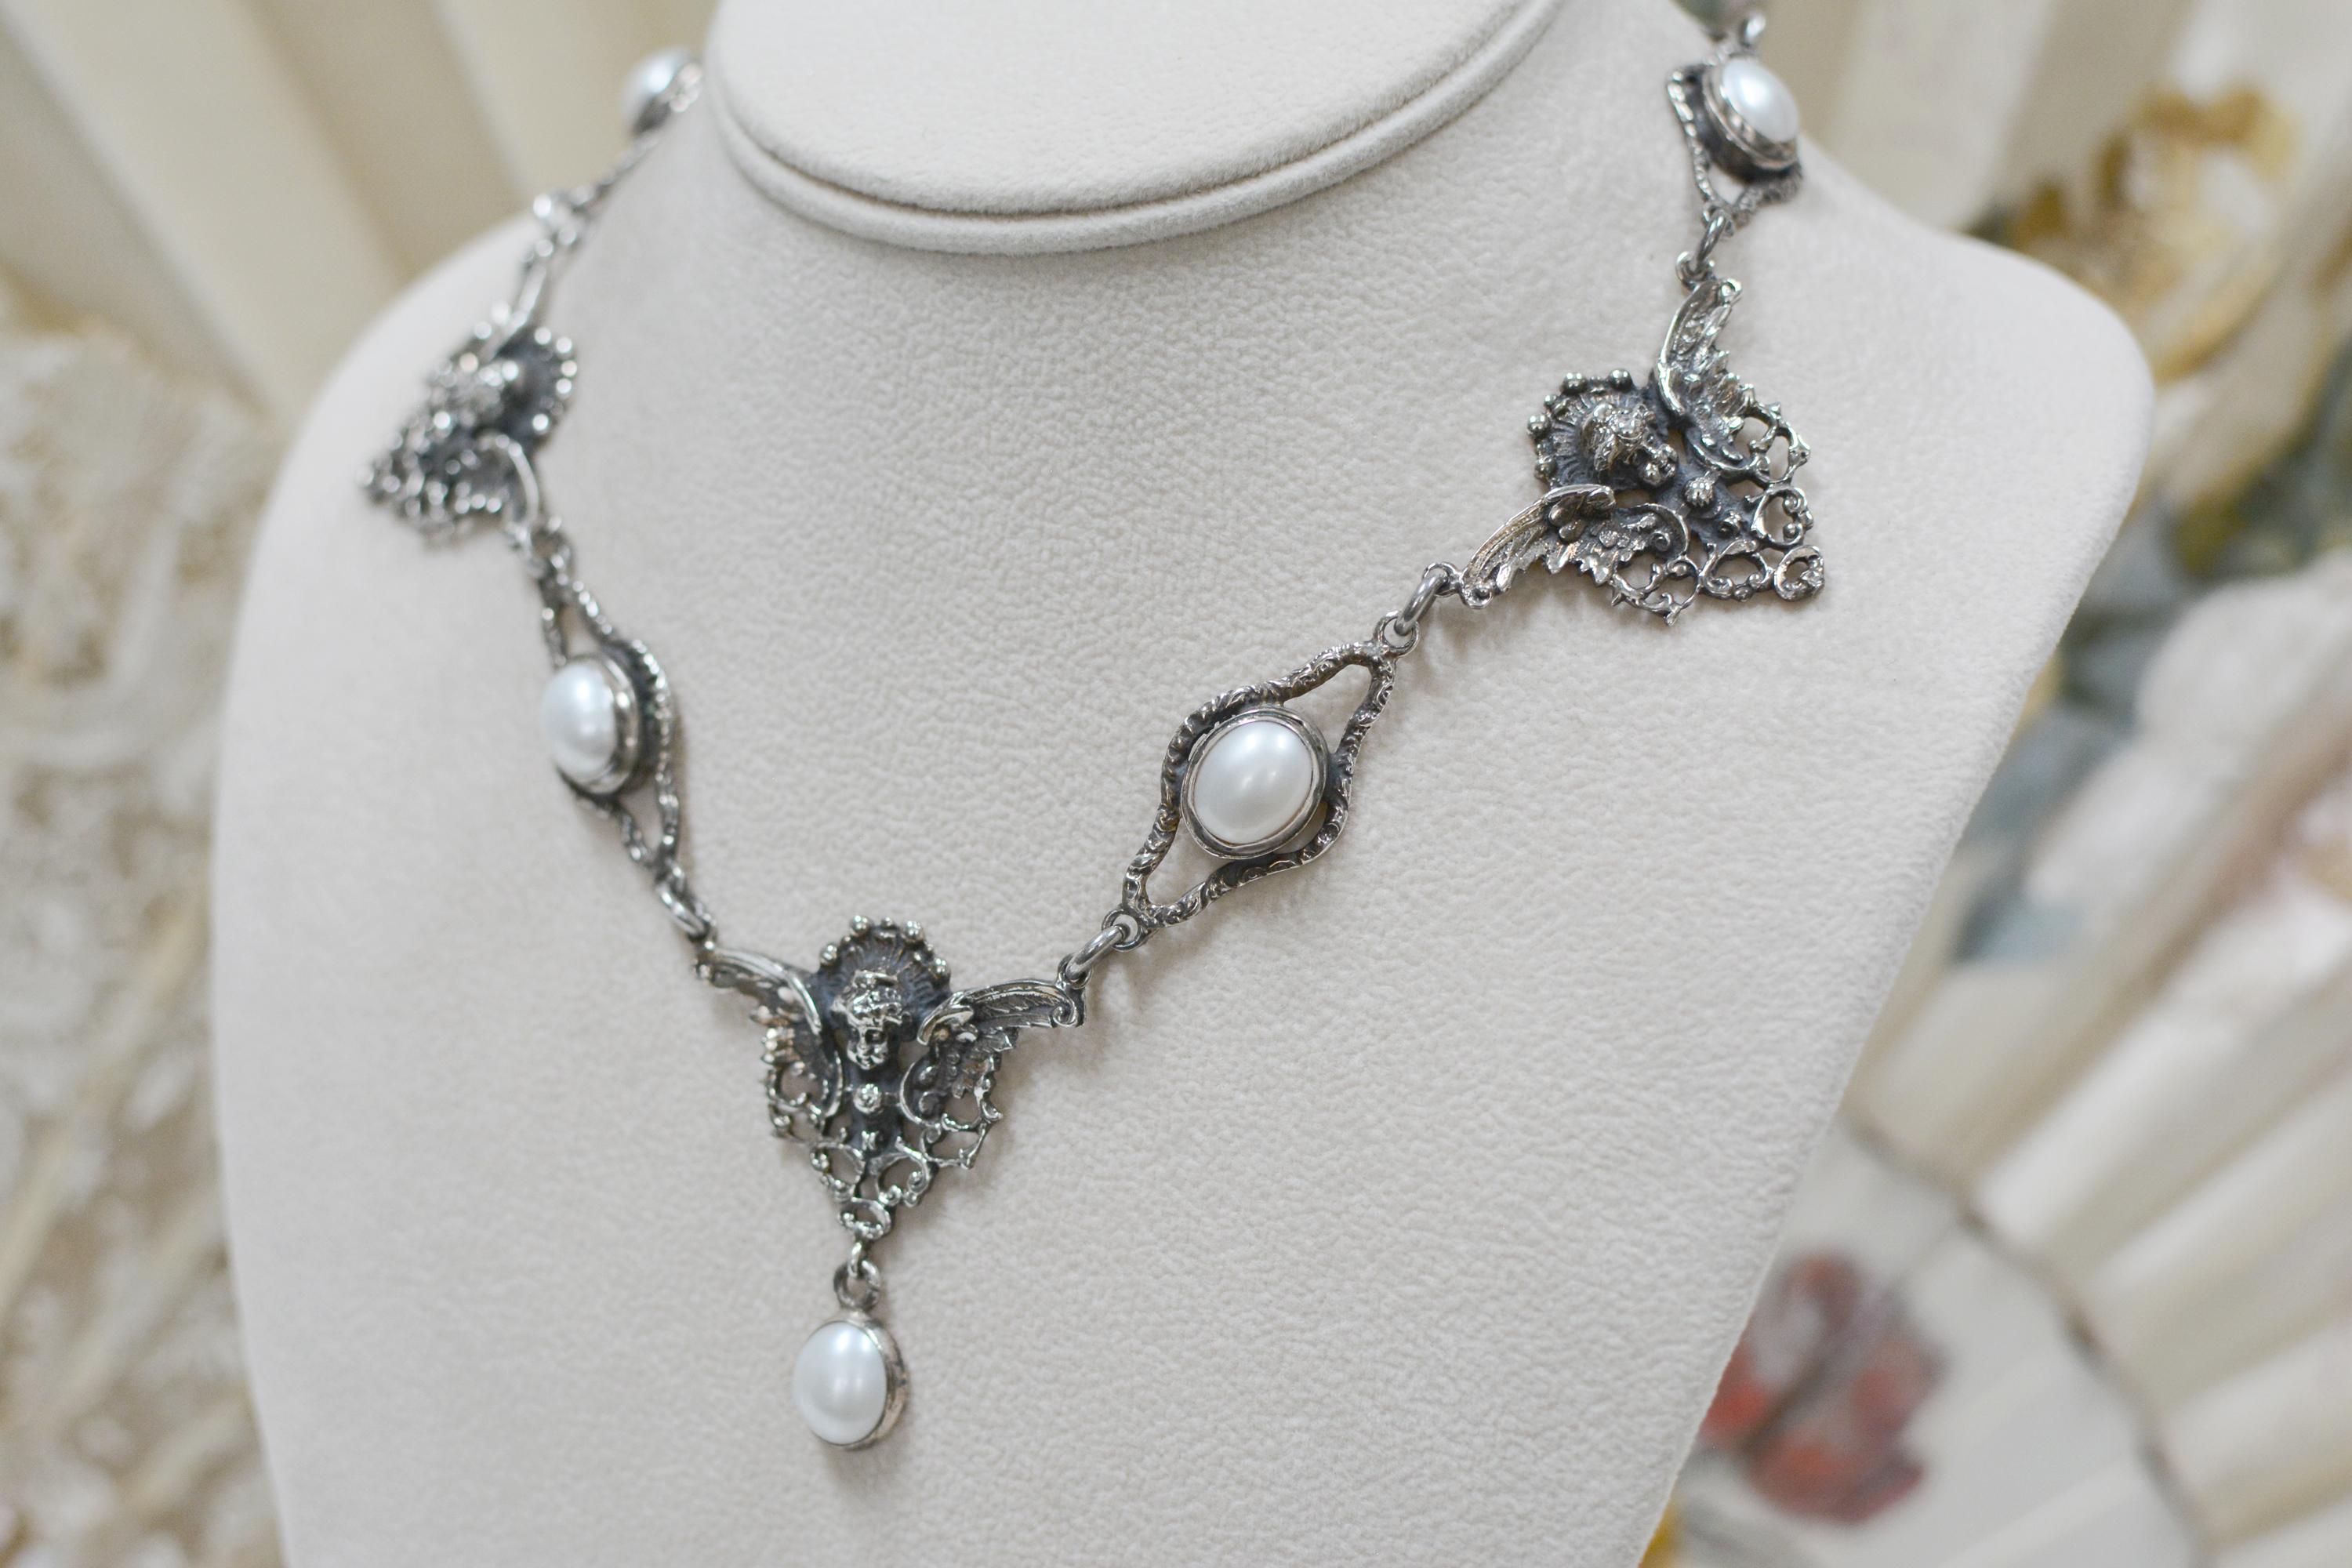 Oval Cut Jill Garber Collection Drop Necklace with Freshwater Pearls and Figural Angels